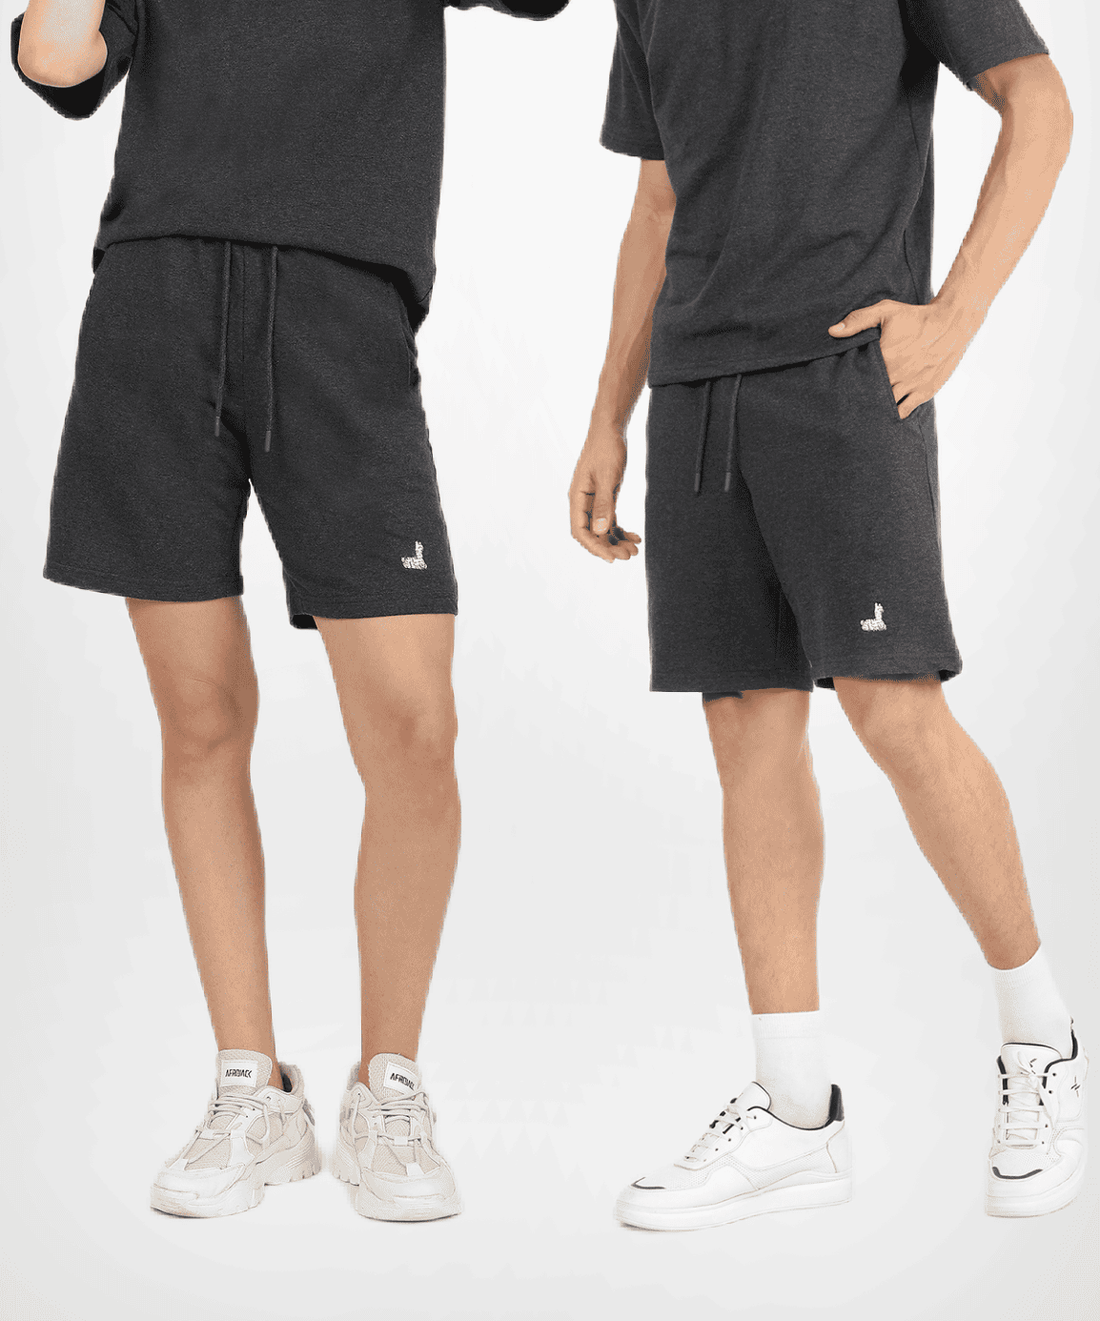 In The Feels Grey Unisex Shorts